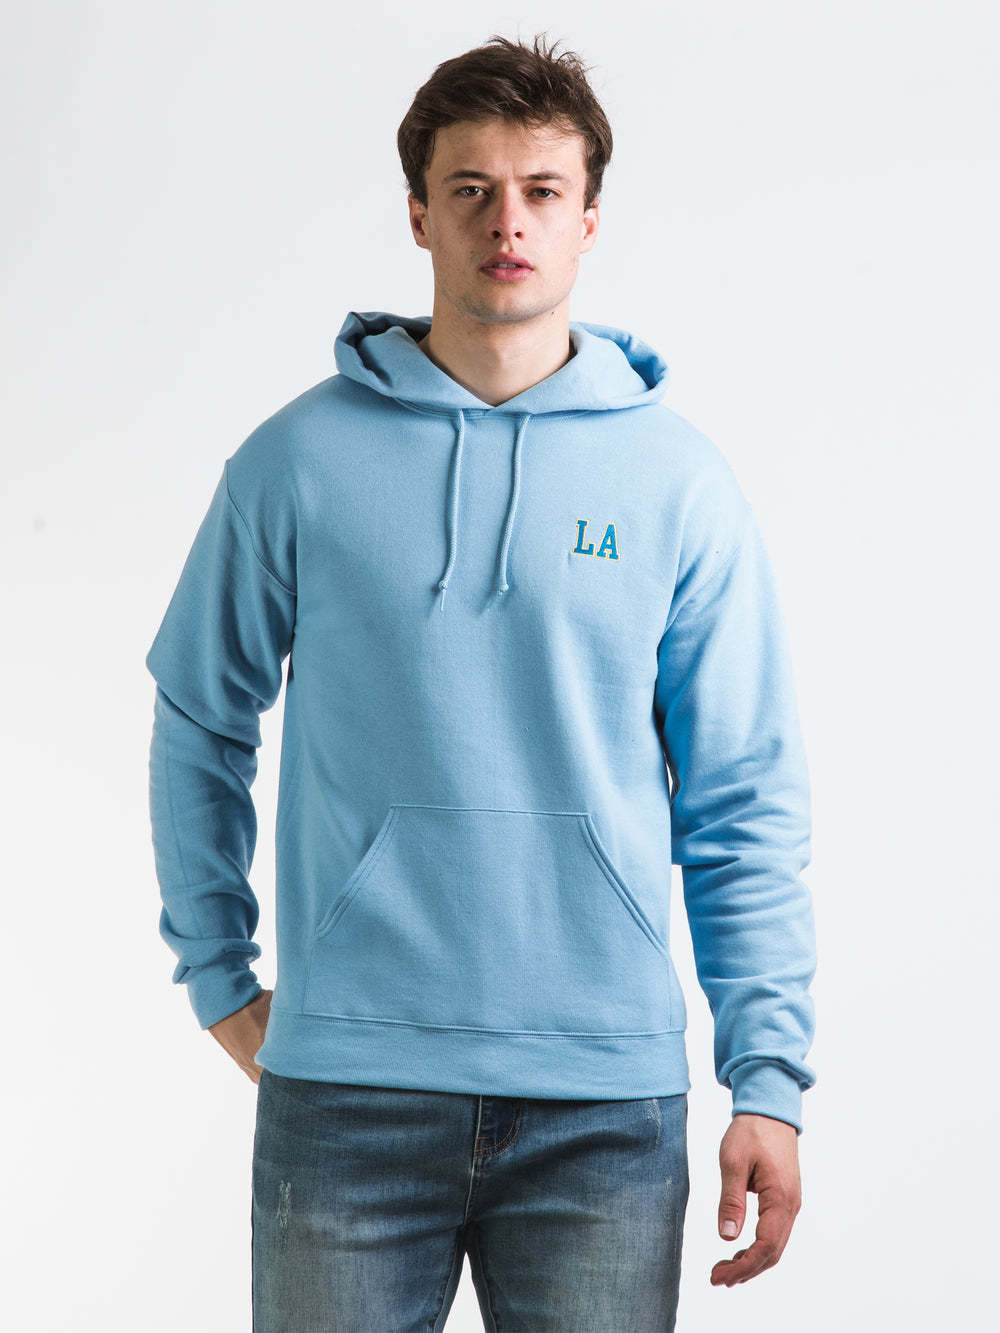 LA EMBROIDERED HOODIE - CLEARANCE